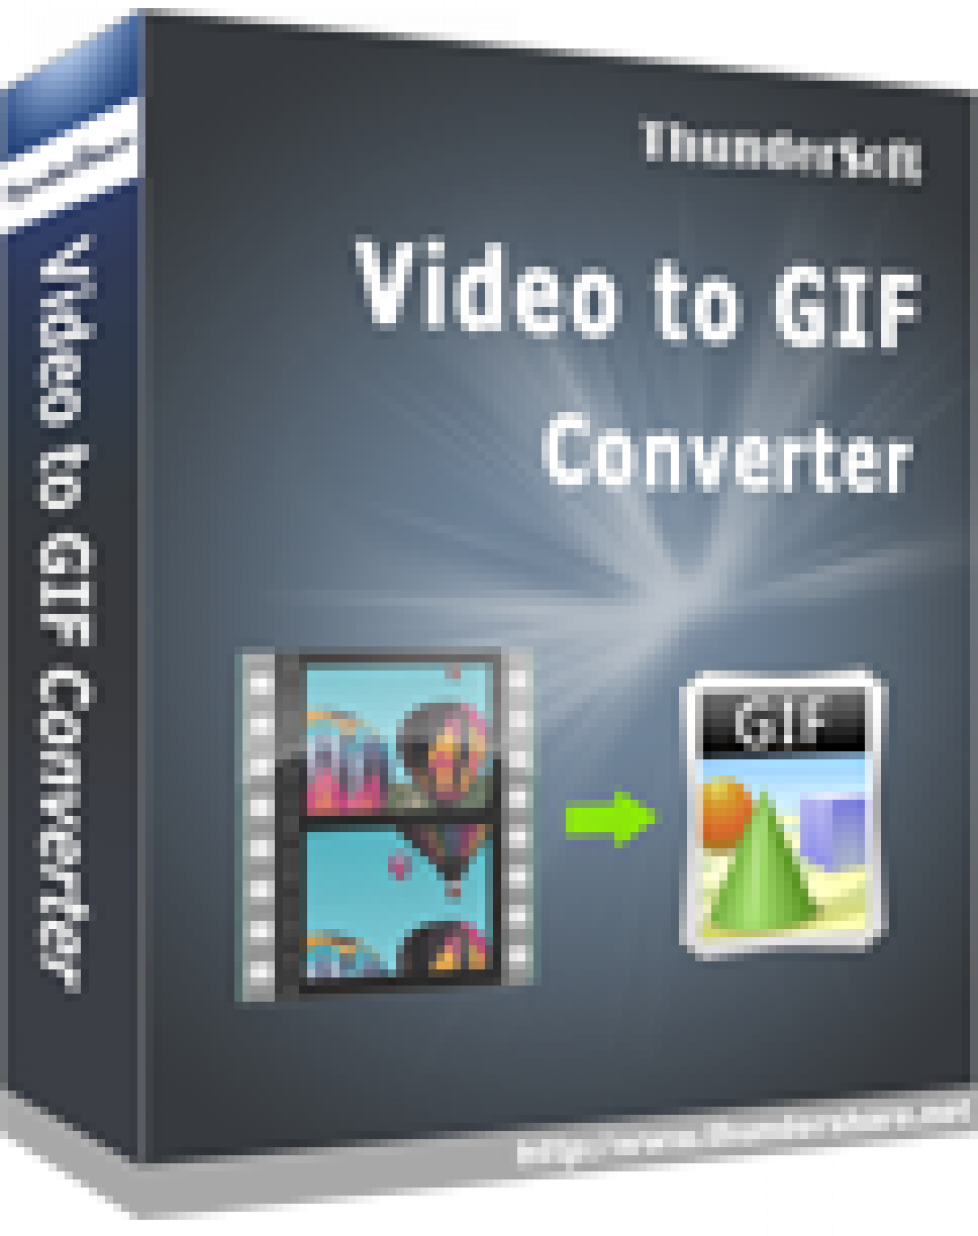 ThunderSoft GIF Converter 5.2.0 free instals